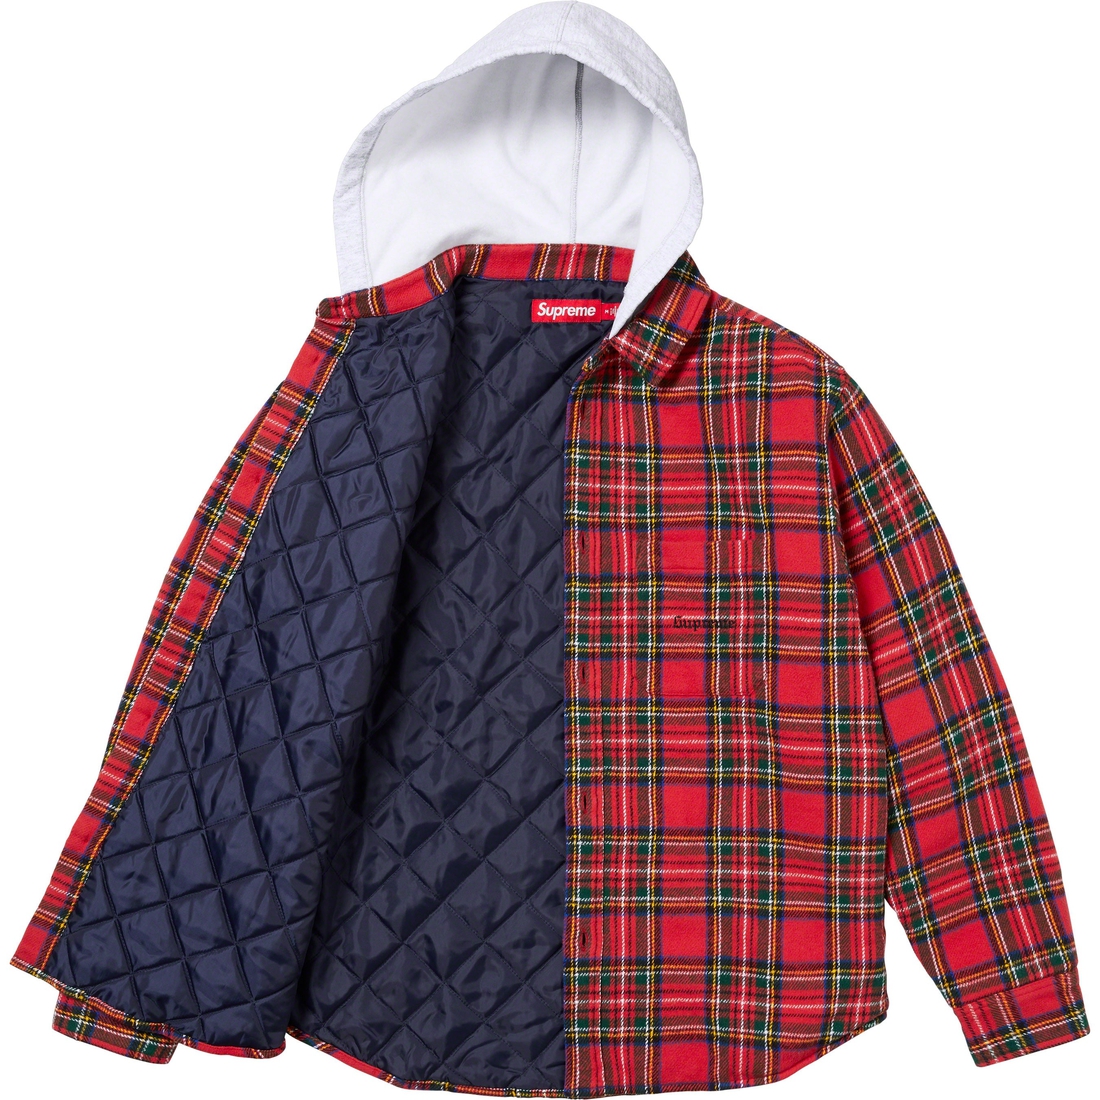 Details on Tartan Flannel Hooded Shirt Red from fall winter
                                                    2023 (Price is $148)